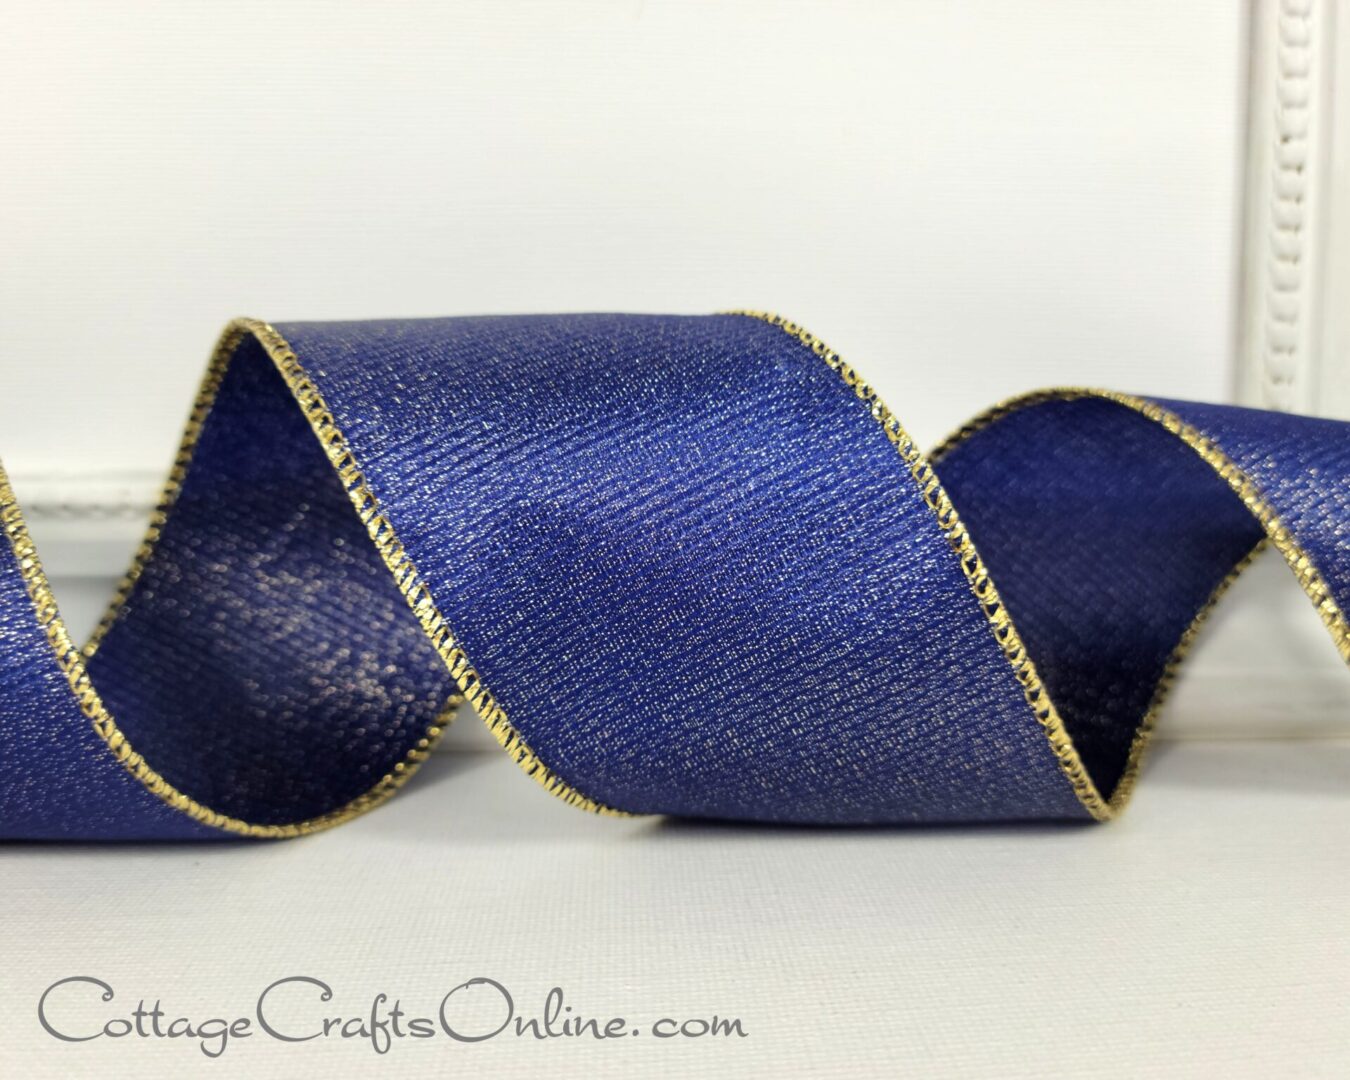 Navy blue with gold edge 2.5" wide wired ribbon from the Etsy shop of Cottage Crafts Online.